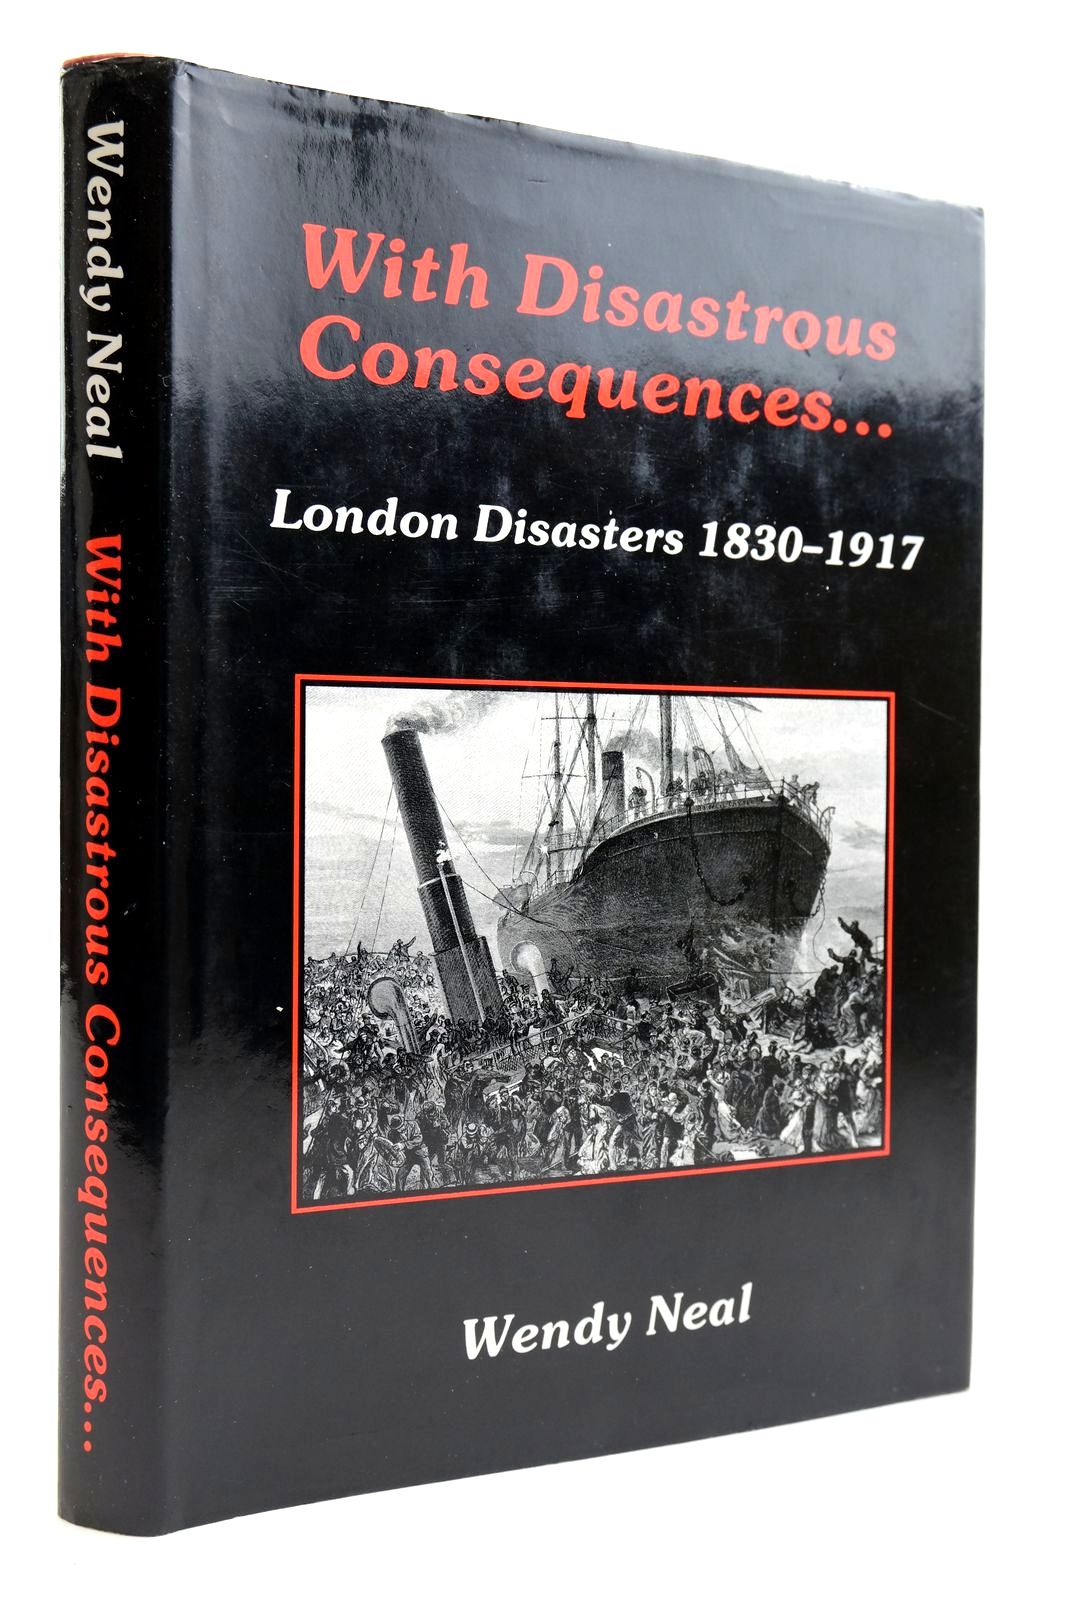 Photo of WITH DISASTROUS CONSEQUENCES: LONDON DISASTERS 1830-1917 written by Neal, Wendy published by Hisarlik Press (STOCK CODE: 2133920)  for sale by Stella & Rose's Books